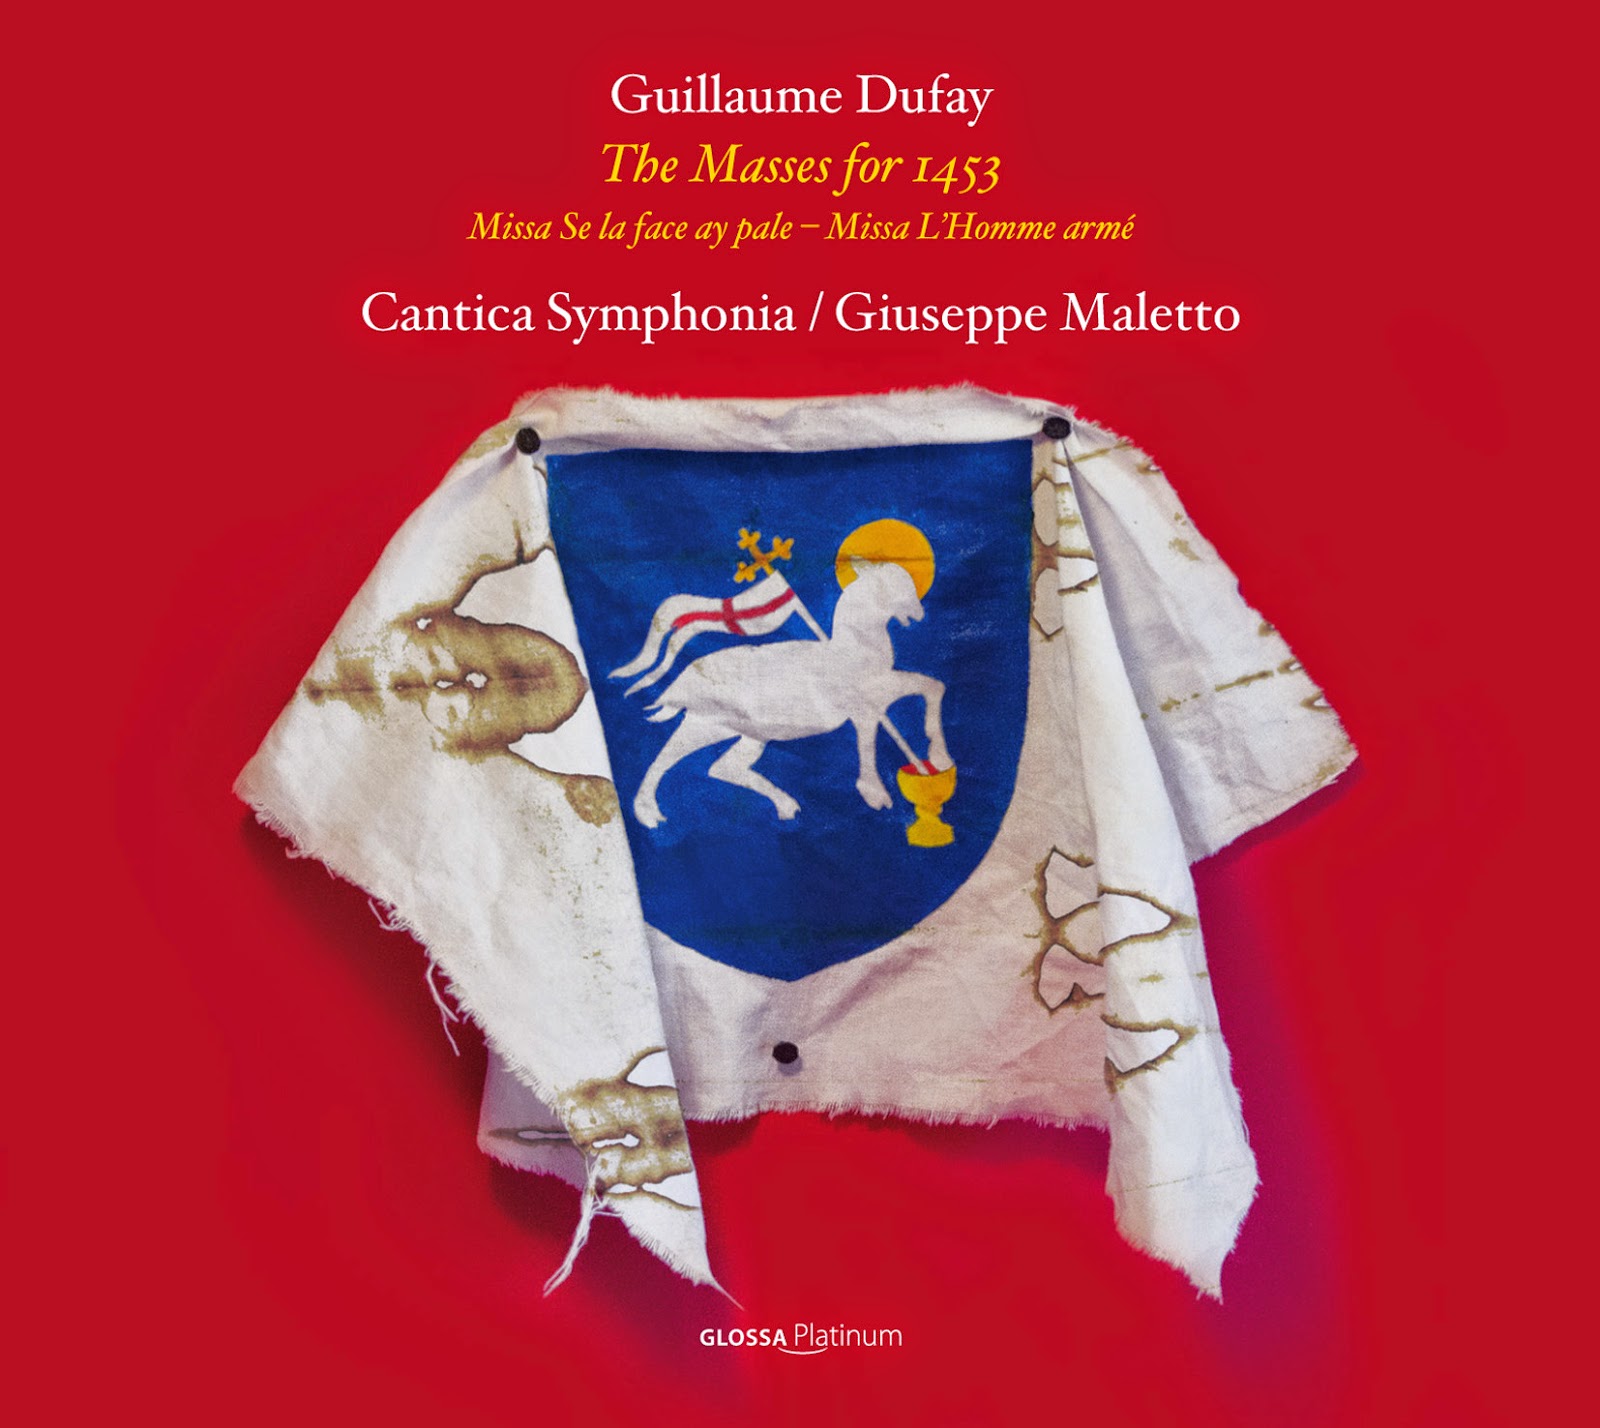 Dufay - The Masses for 1453 - Cantica Symphonia - Glossa